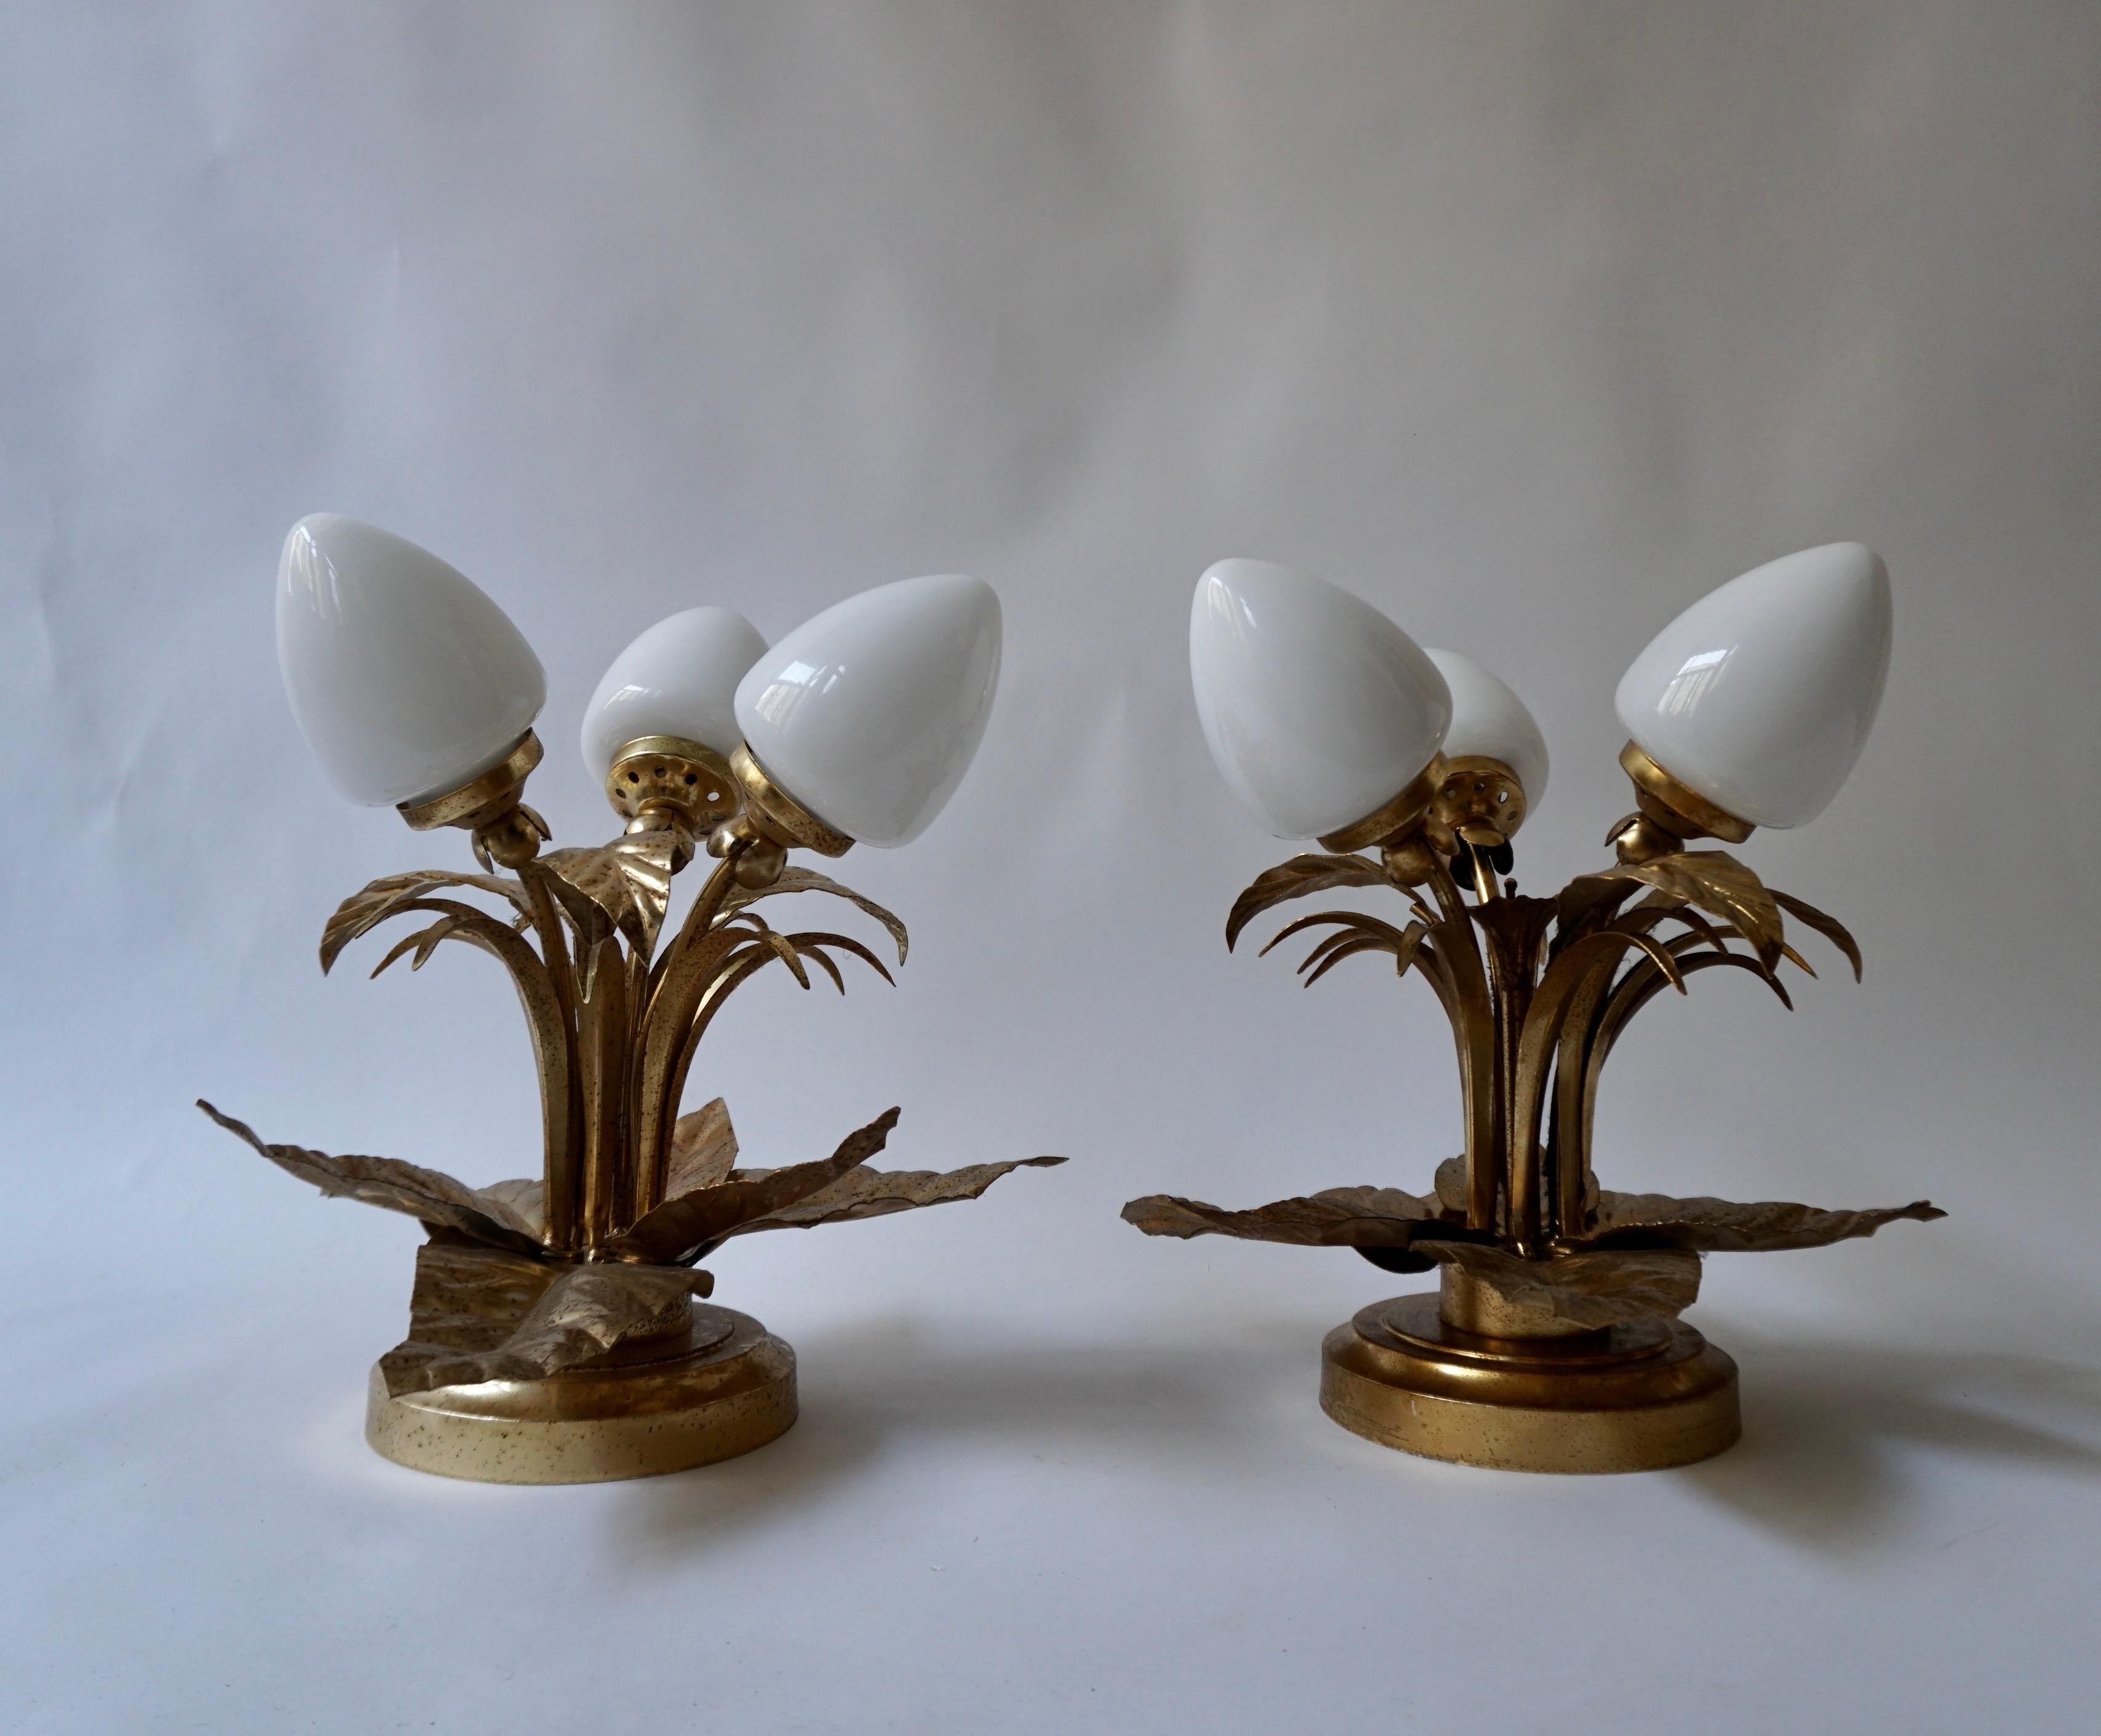 Two Flower-shaped flush mount, gilded iron, gold leaf, Italy, 1950s. These striking lighting fixtures are made of hand-carved iron and consist of two layers of gilded leaves in two shades with three white glass shades in the middle. They have a